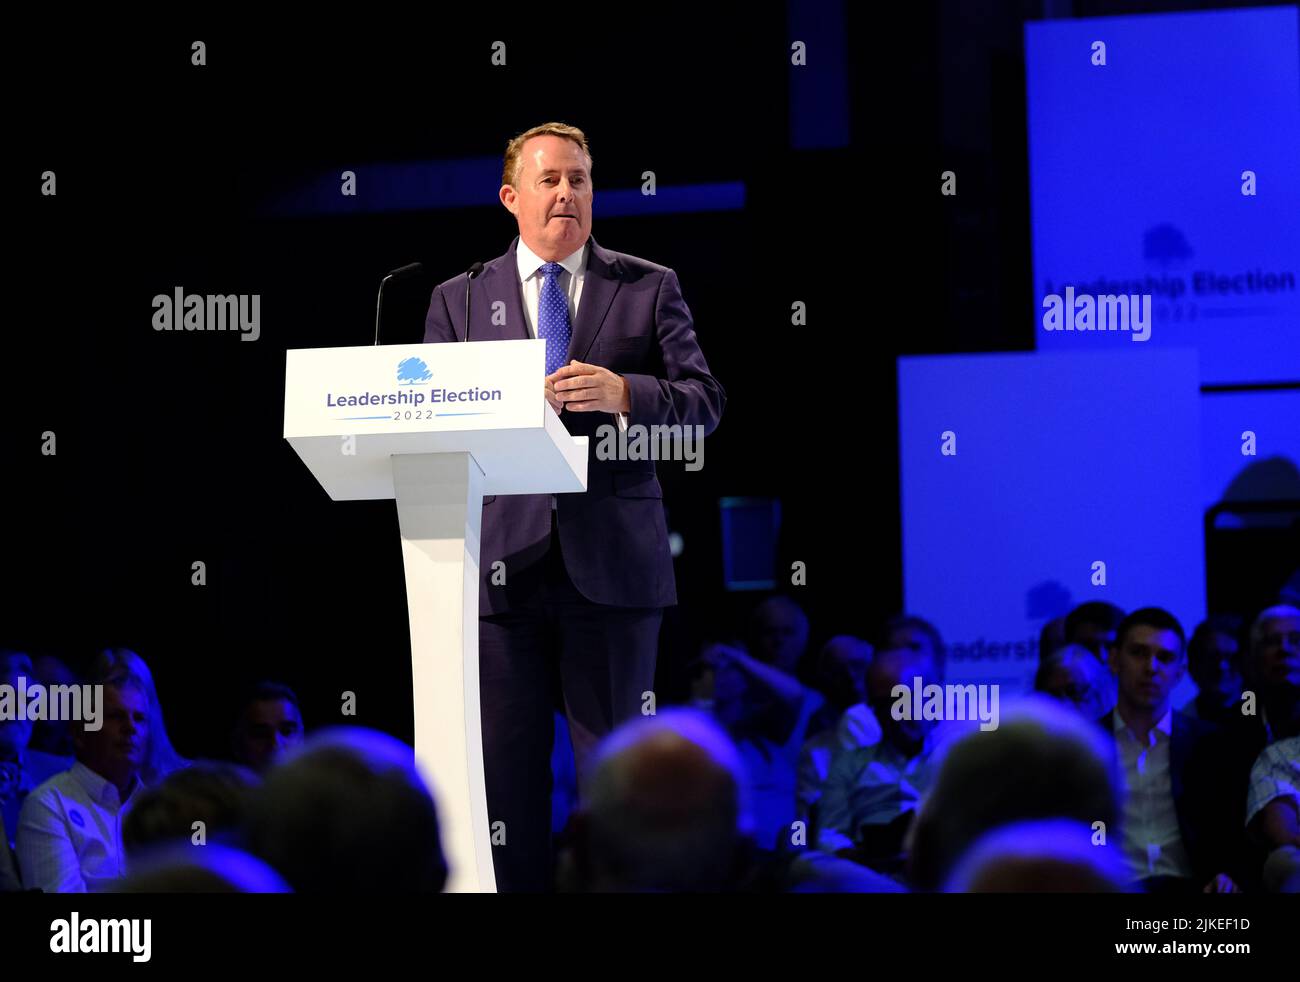 Exeter Devon UK. Conservative Party Hustings. Tory members gathered in the Great Hall at Exeter University to listen to varies senior Conservative MPs support their choice for the next PM. This is Liam Fox mp who supports Rishi Sunak. Credit: charlie bryan/Alamy Live News Stock Photo